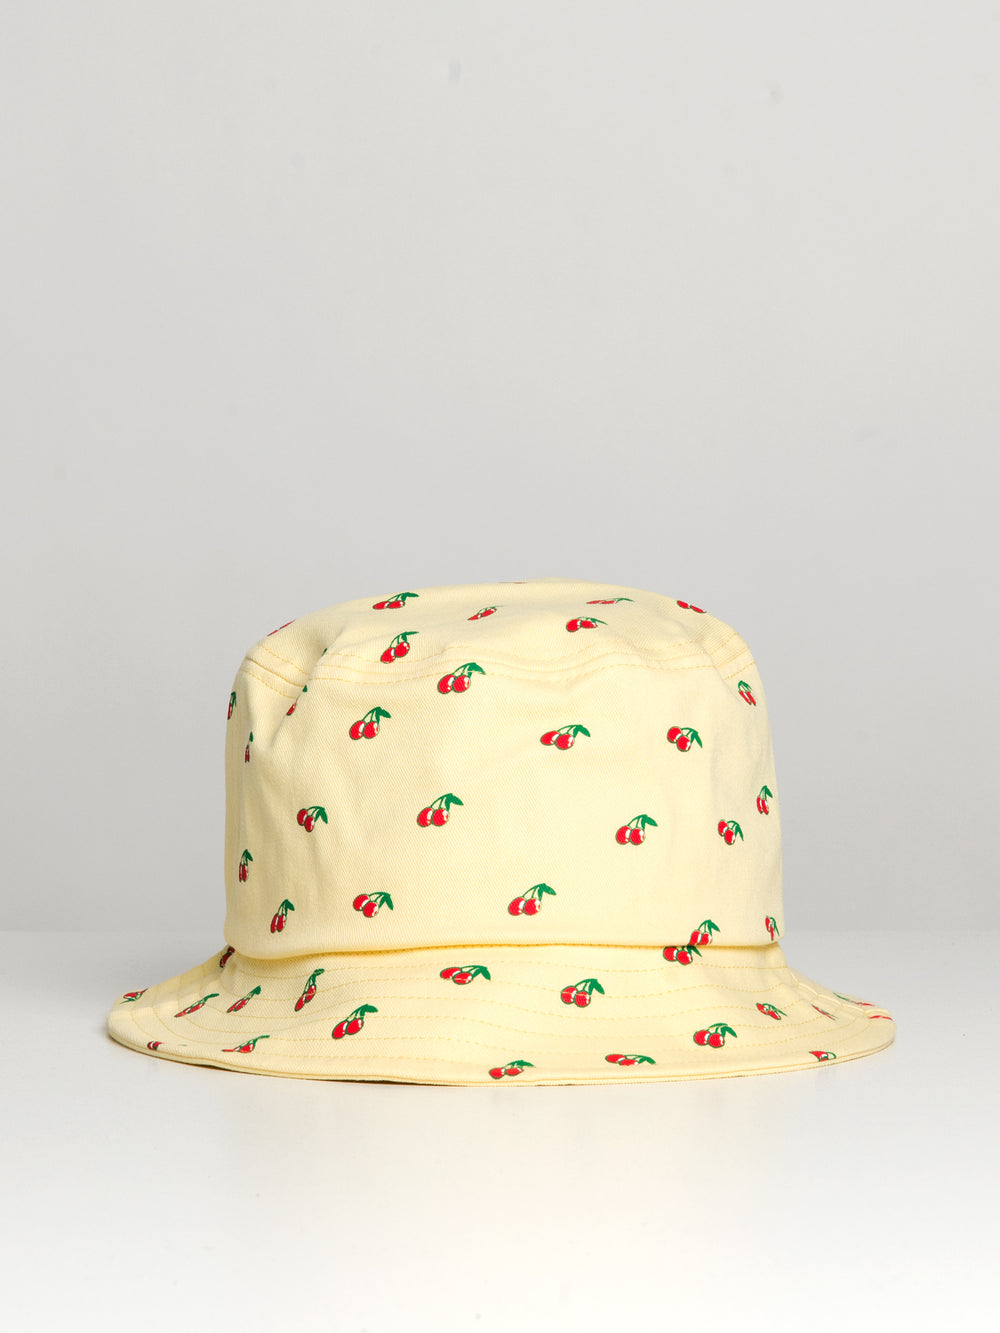 DLG BUCKET HAT - ALL OVER CHERRY - CLEARANCE